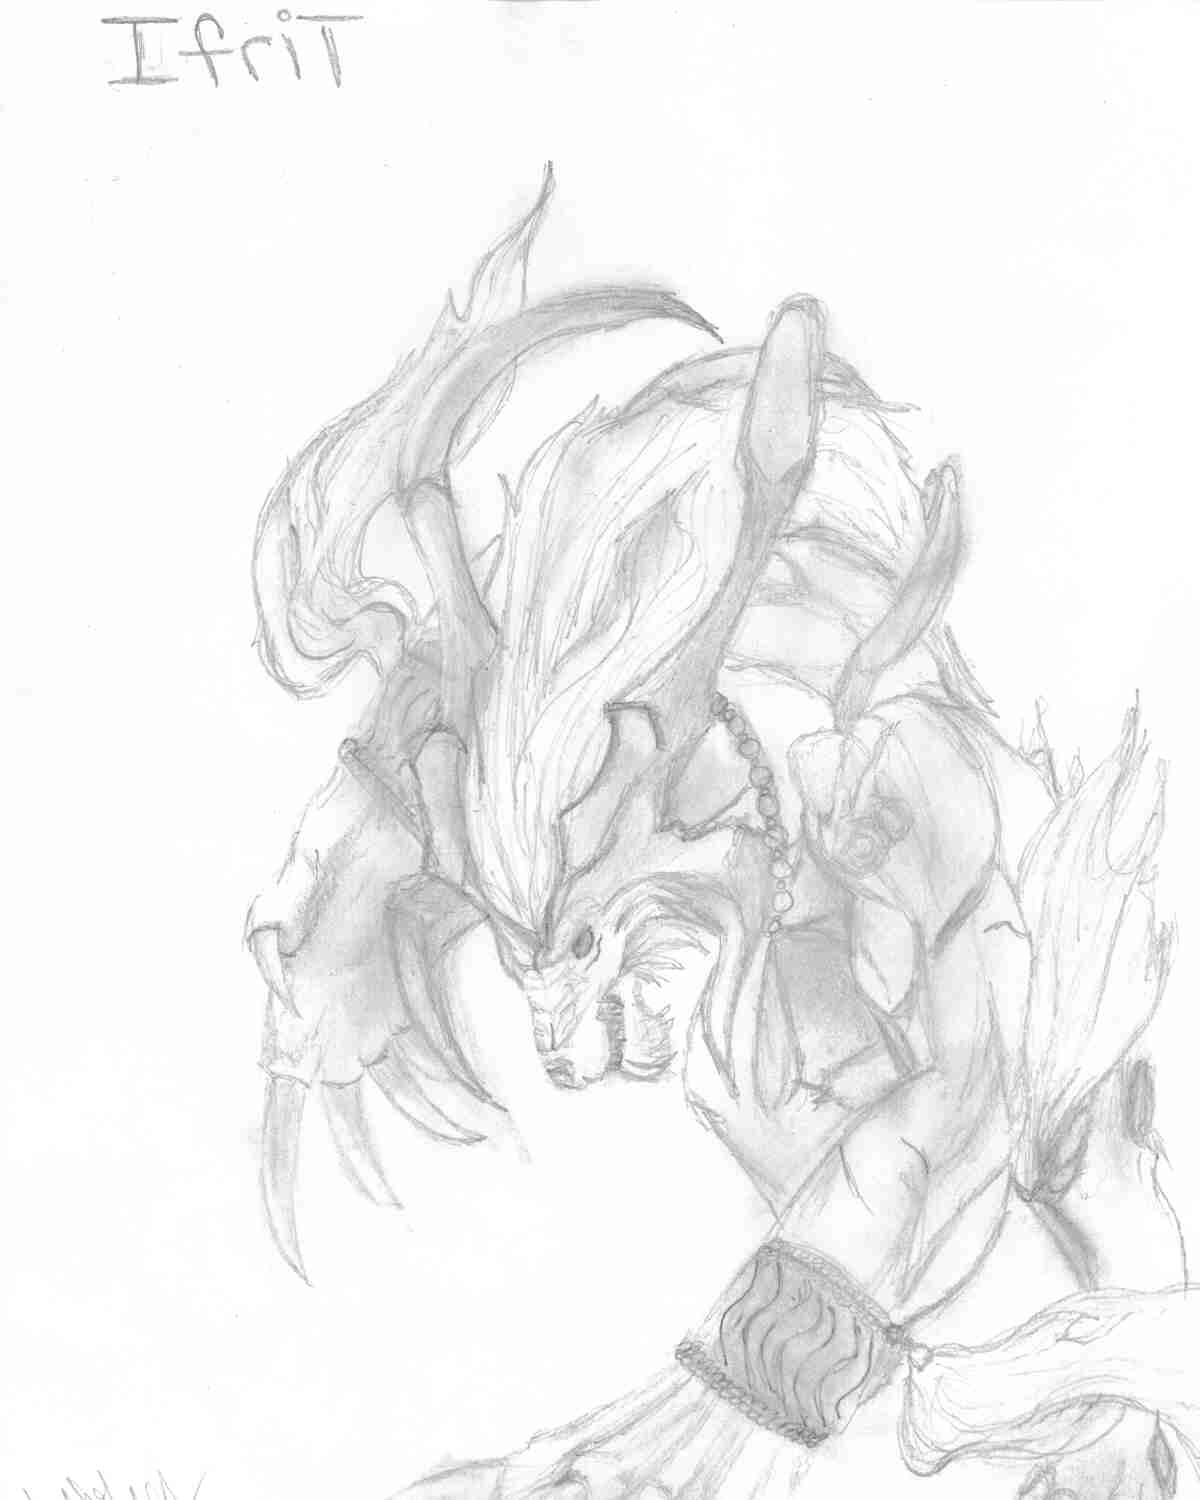 Ifrit (pencil drawing) by Heatherenie